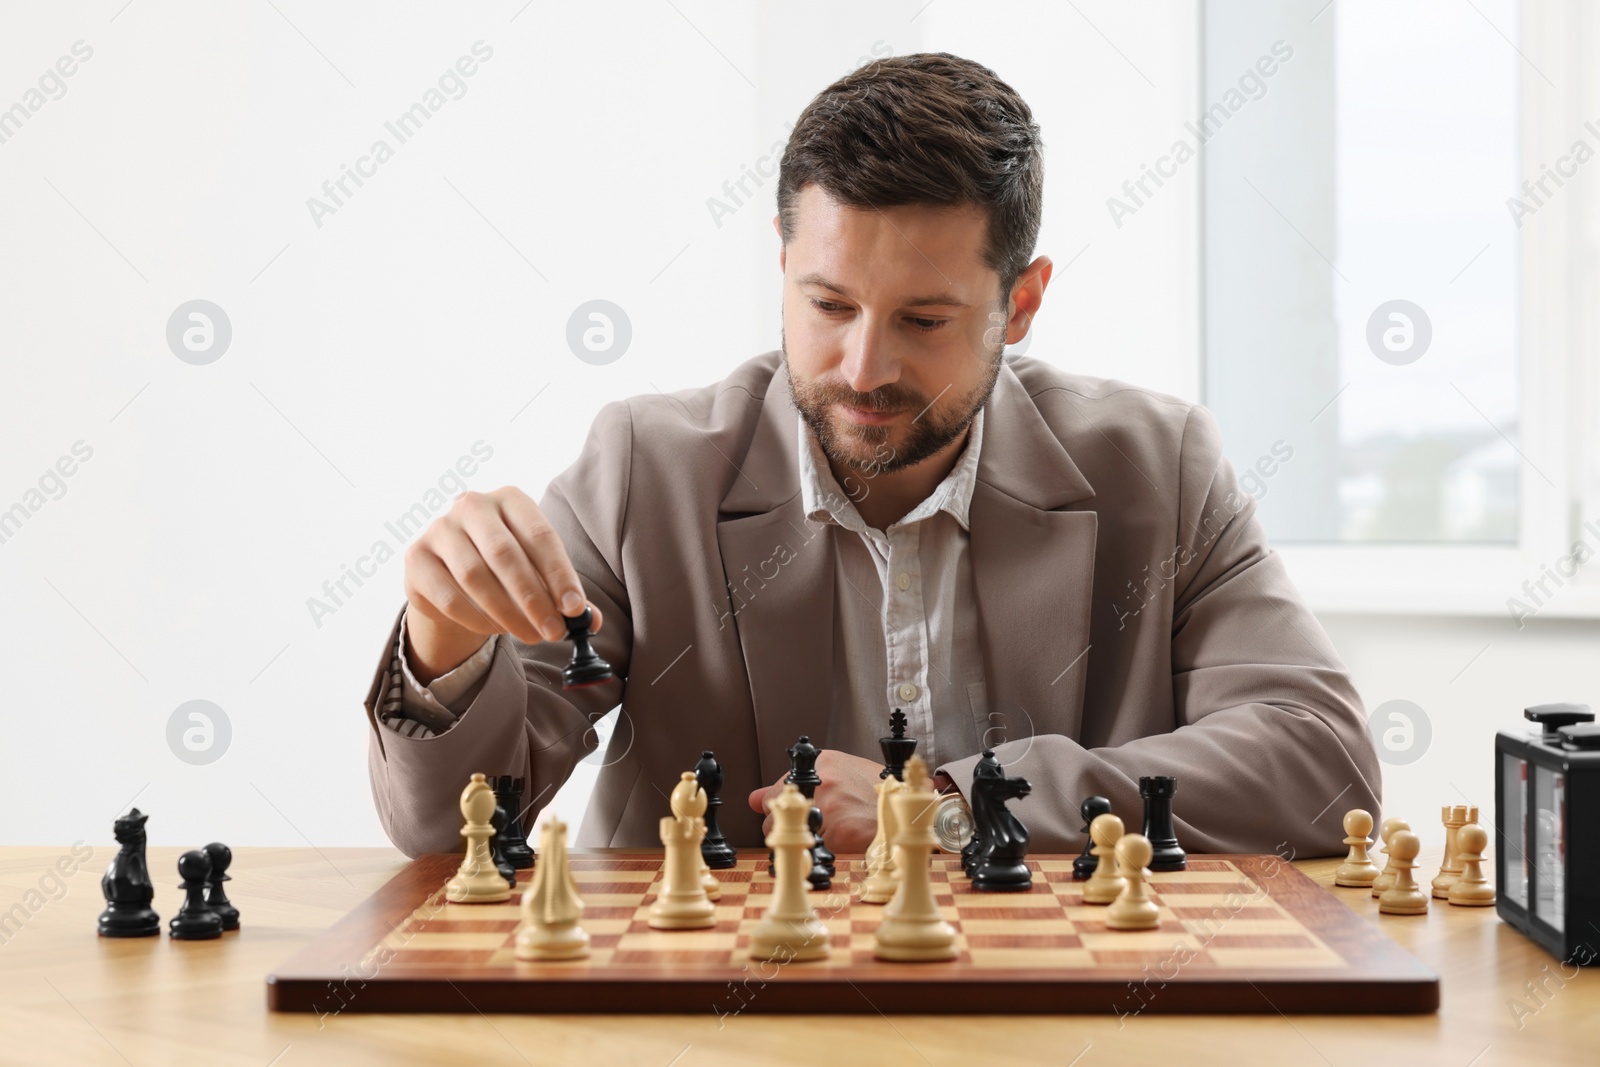 Photo of Man playing chess during tournament at table indoors